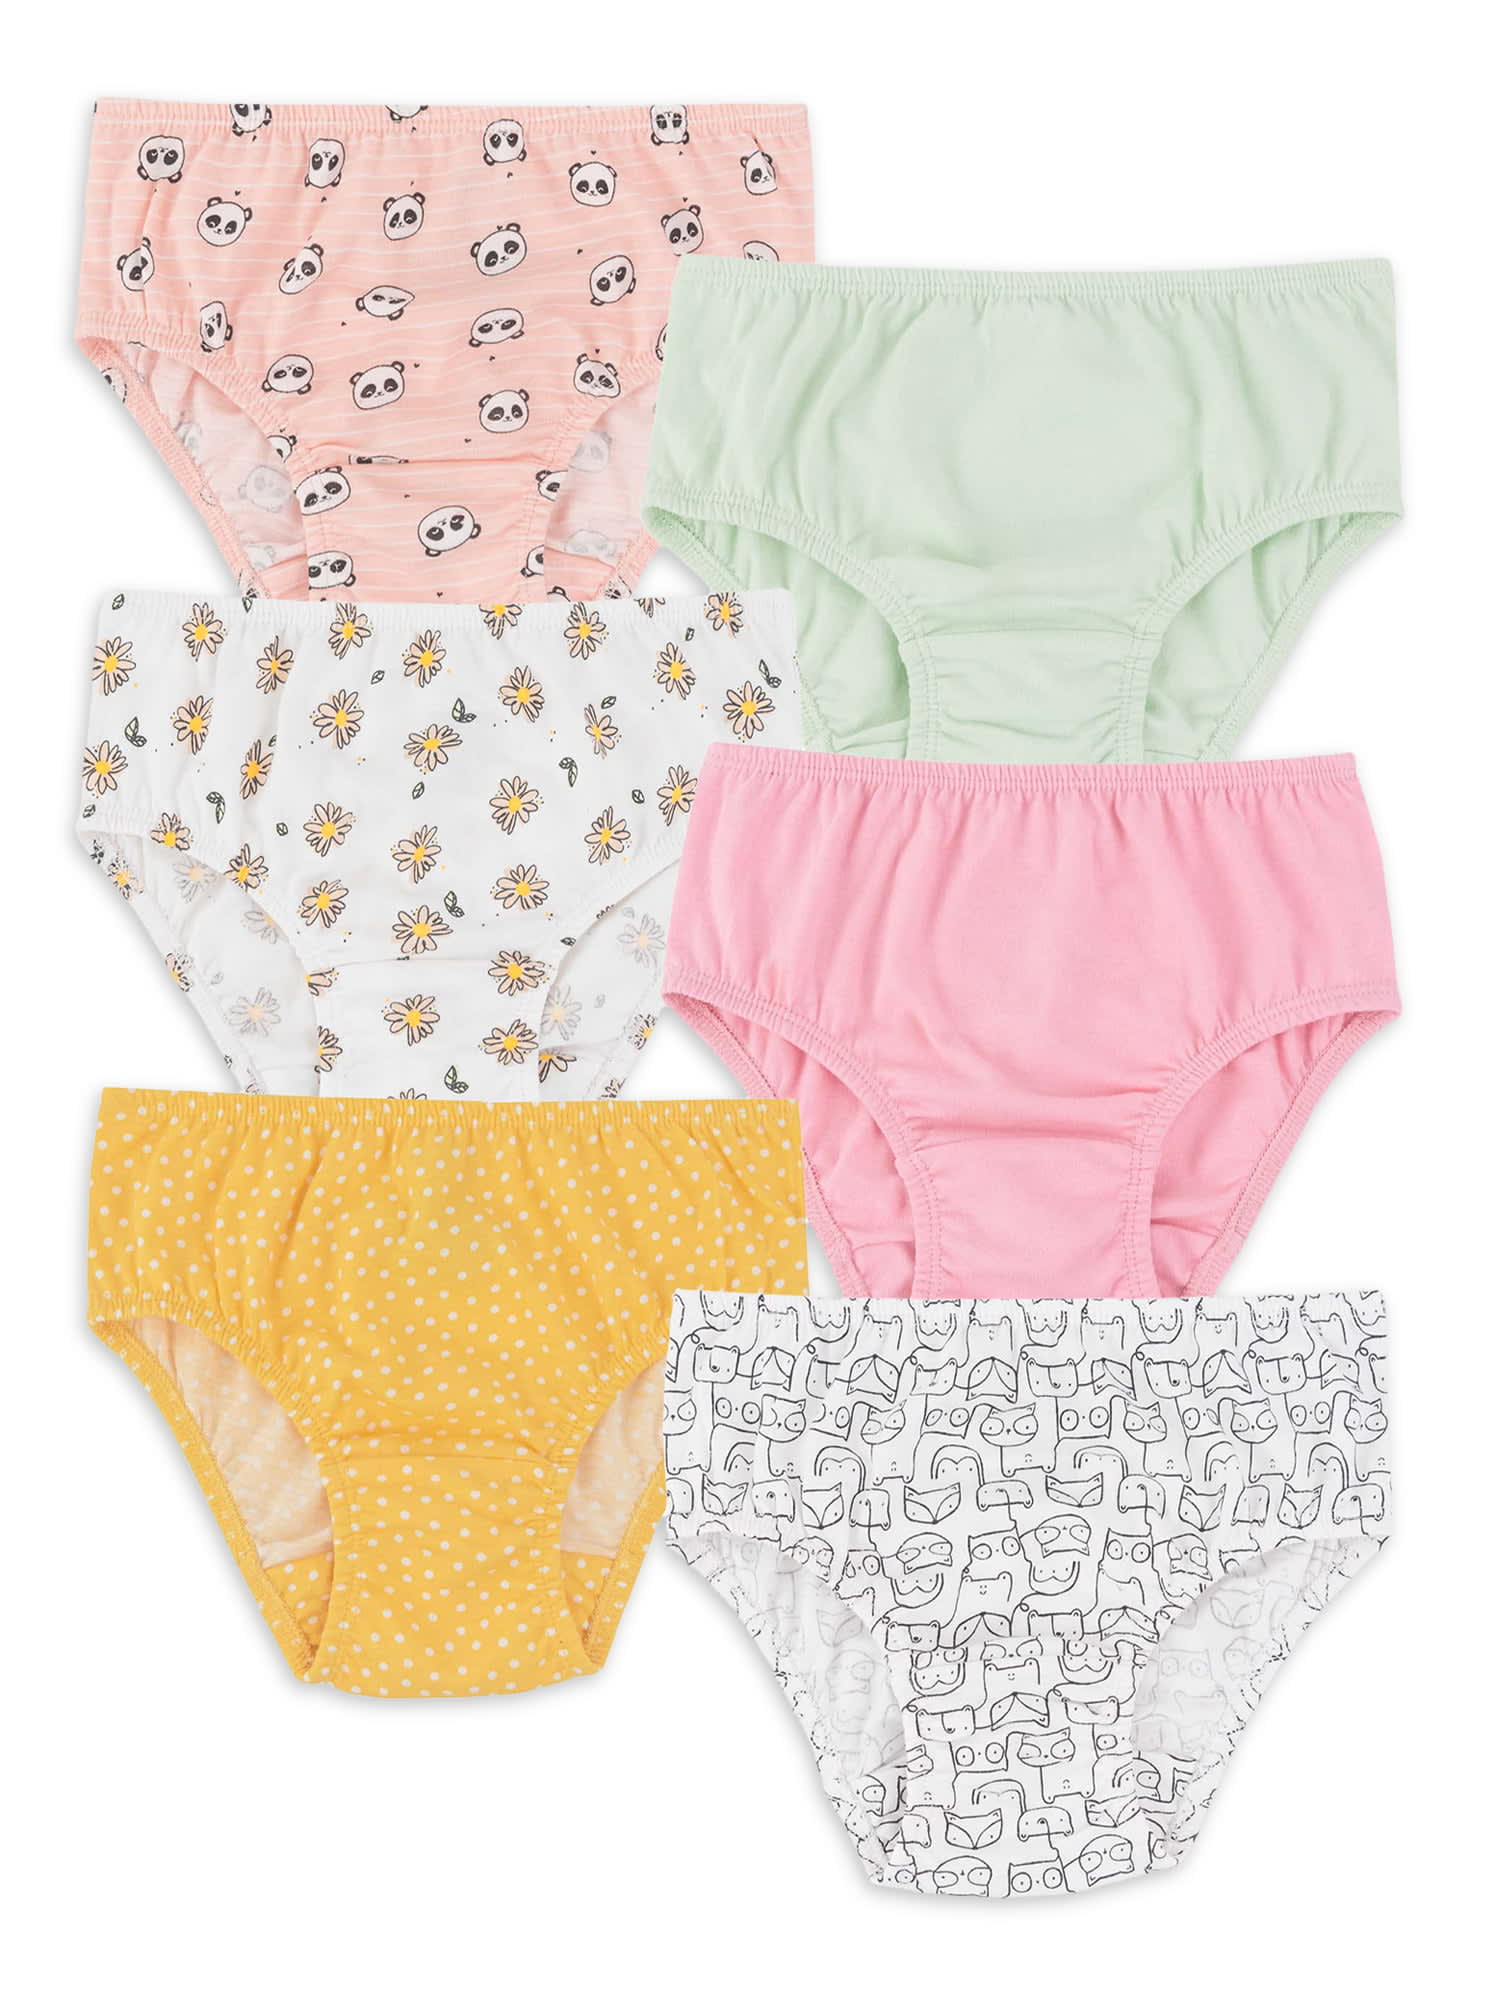 New Fruit of the Loom Girl's Eversoft Brief Underwear (6 Pack)